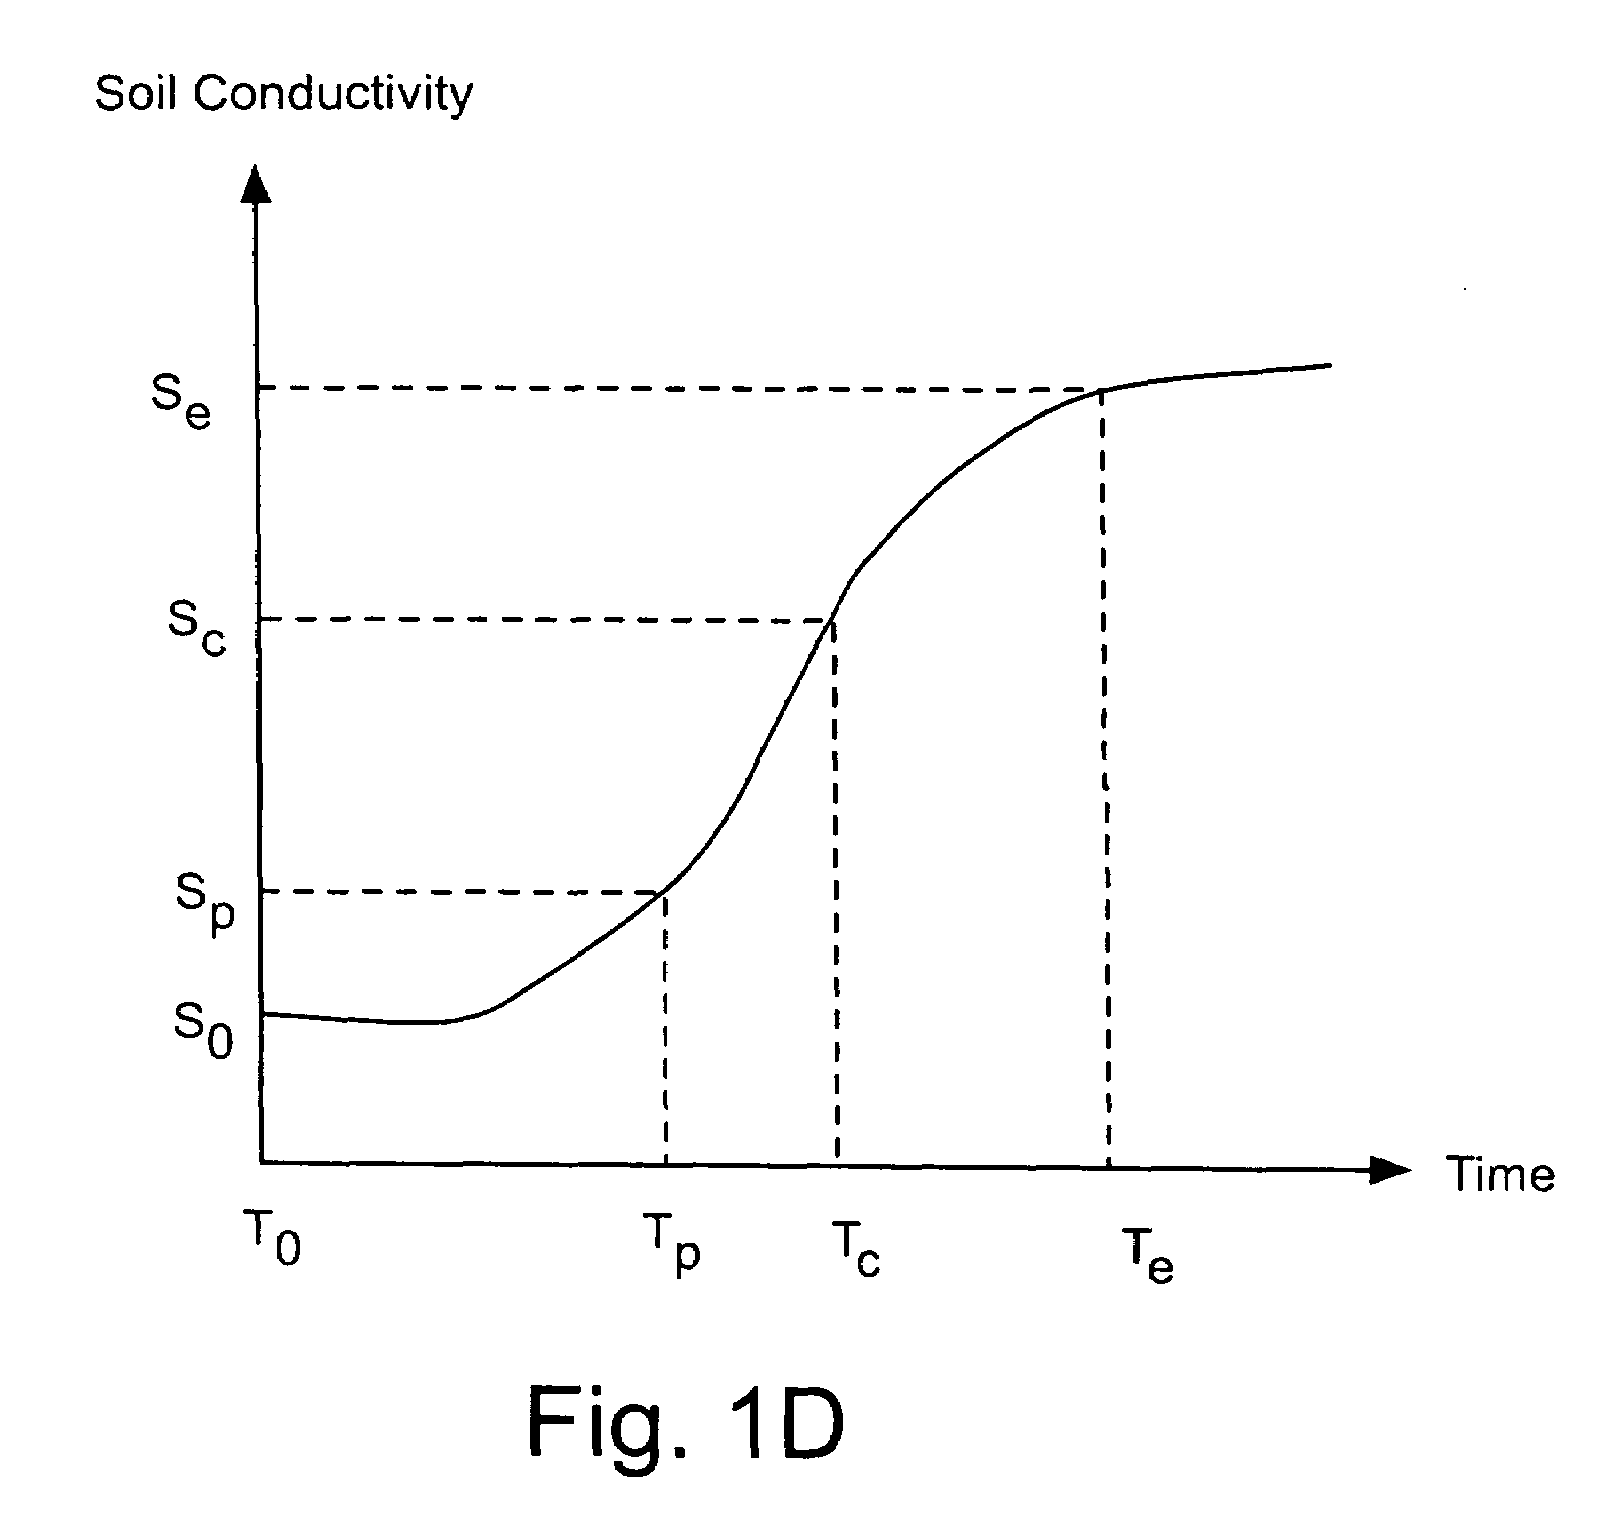 Method and apparatus using soil conductivity thresholds to control irrigating plants